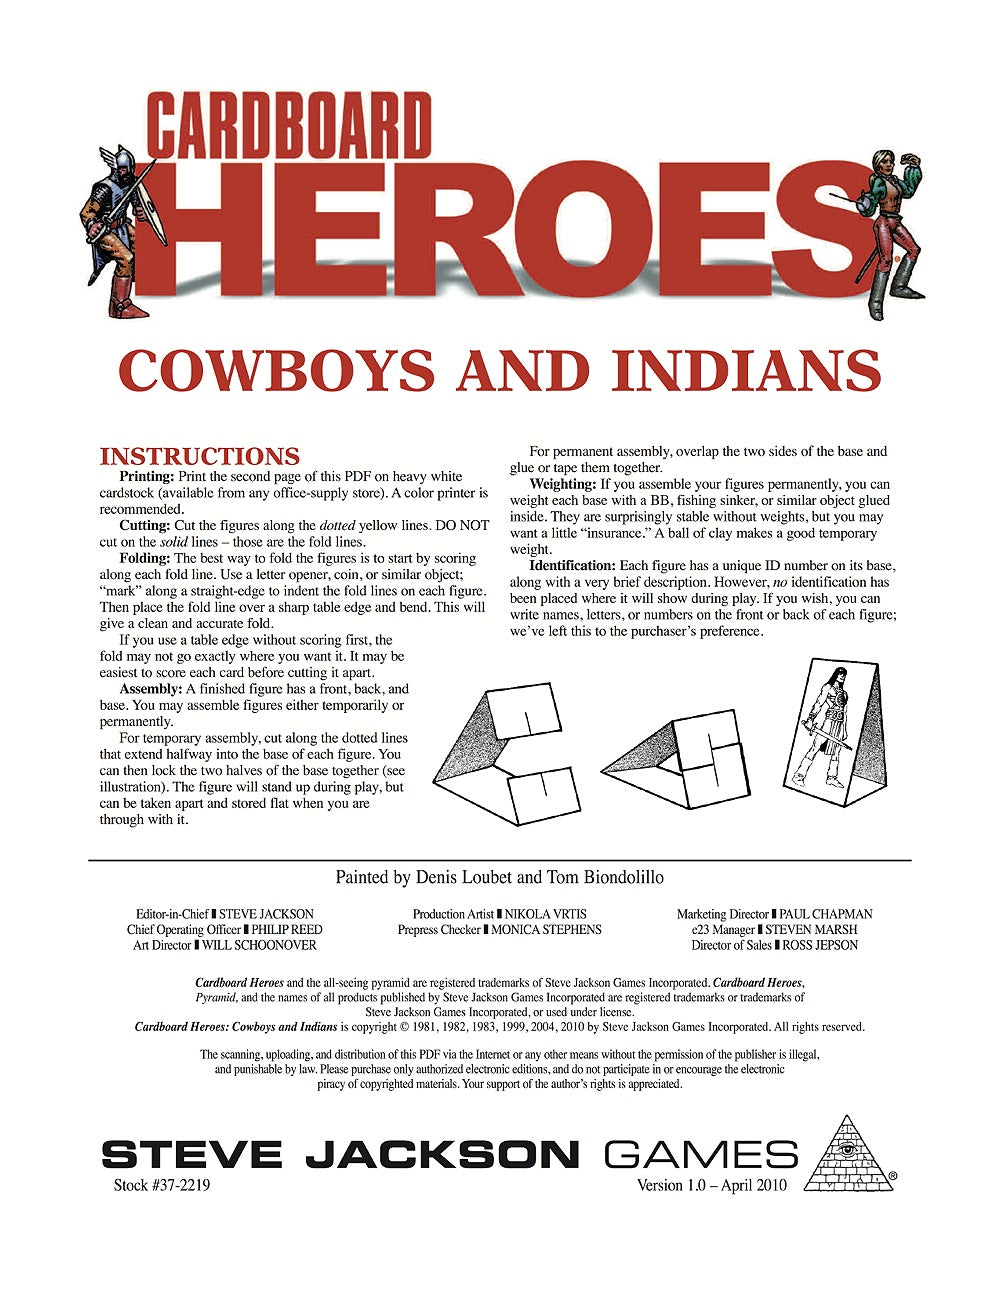 Cardboard Heroes: Cowboys and Indians